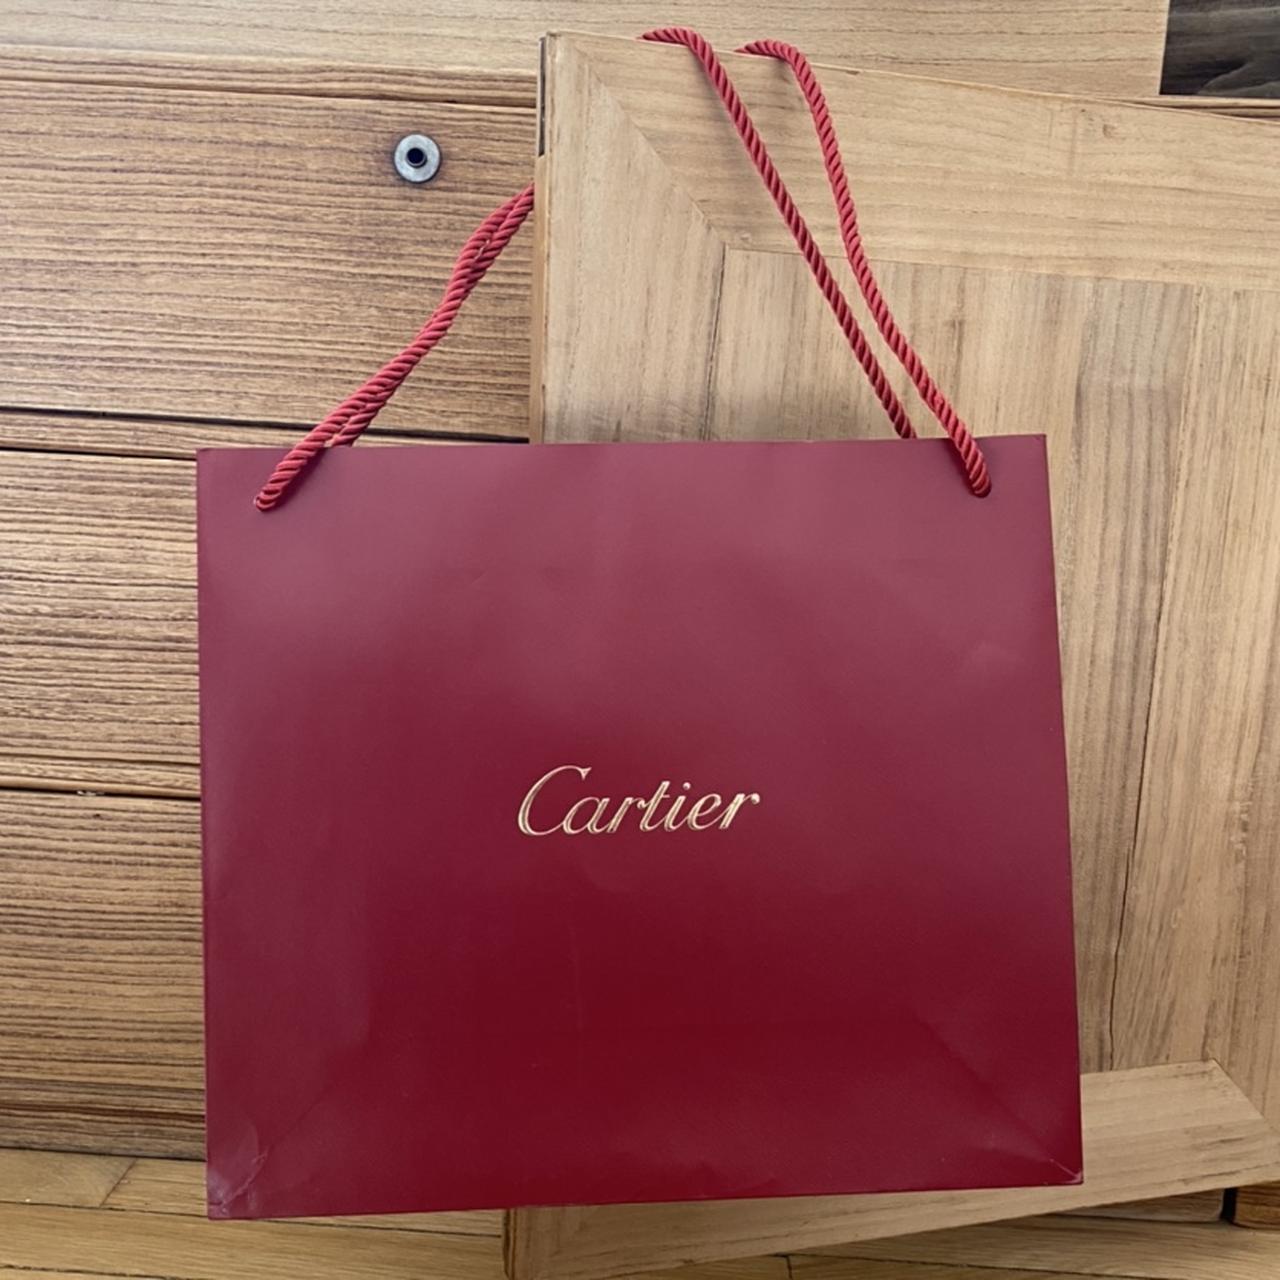 Cartier, Bags, Authentic Cartier Gift Bag With Receipt Envelope Holder